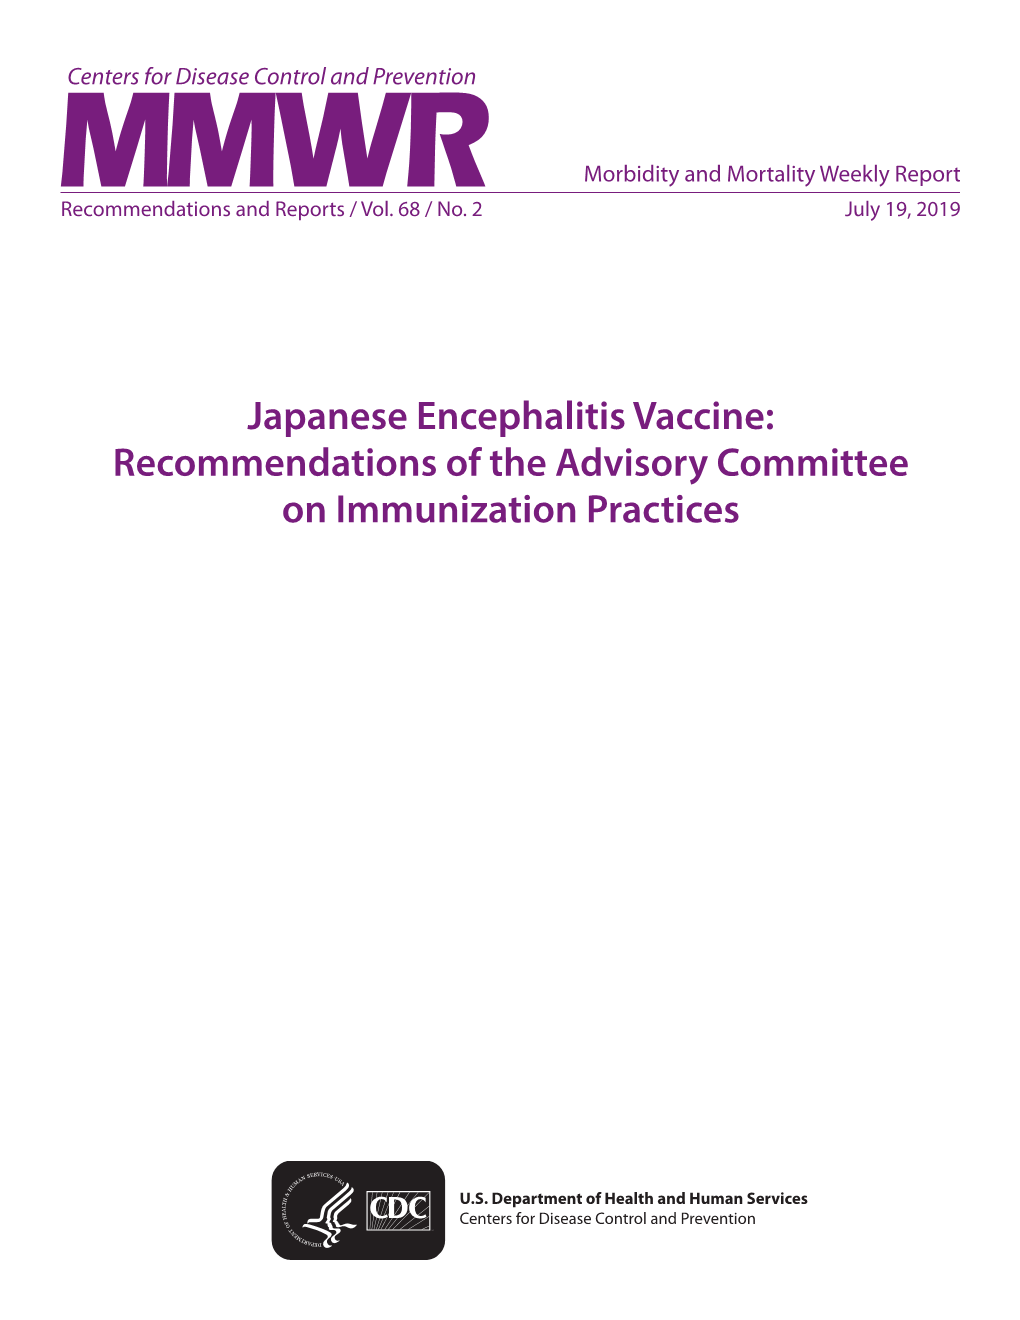 Japanese Encephalitis Vaccine: Recommendations of the Advisory Committee on Immunization Practices